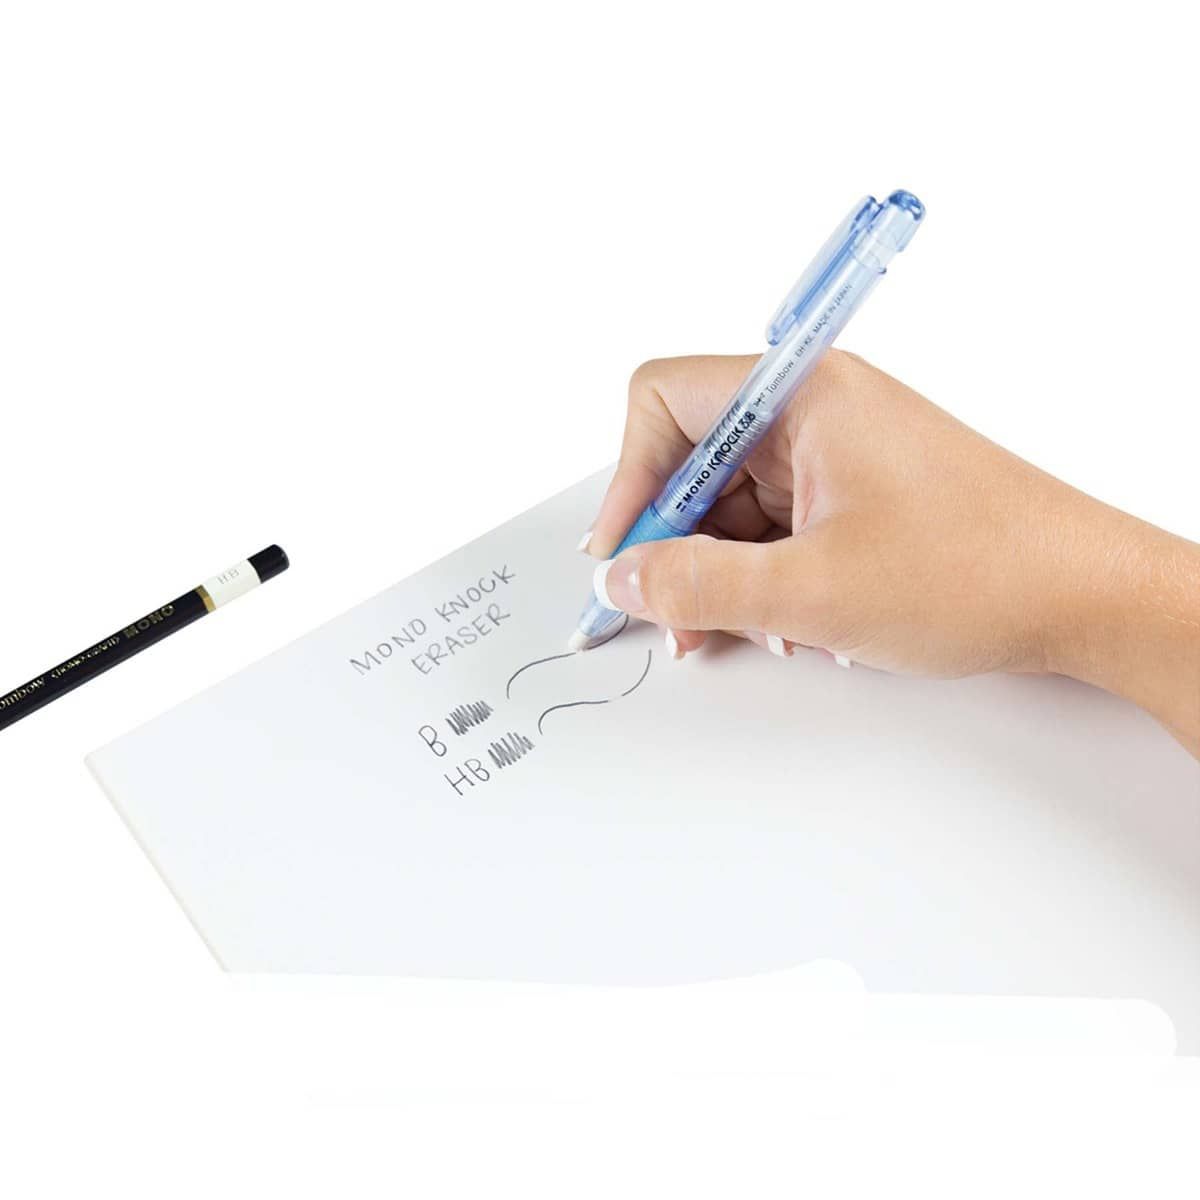 Easily make corrections on the go with these refillable pen-style erasers!